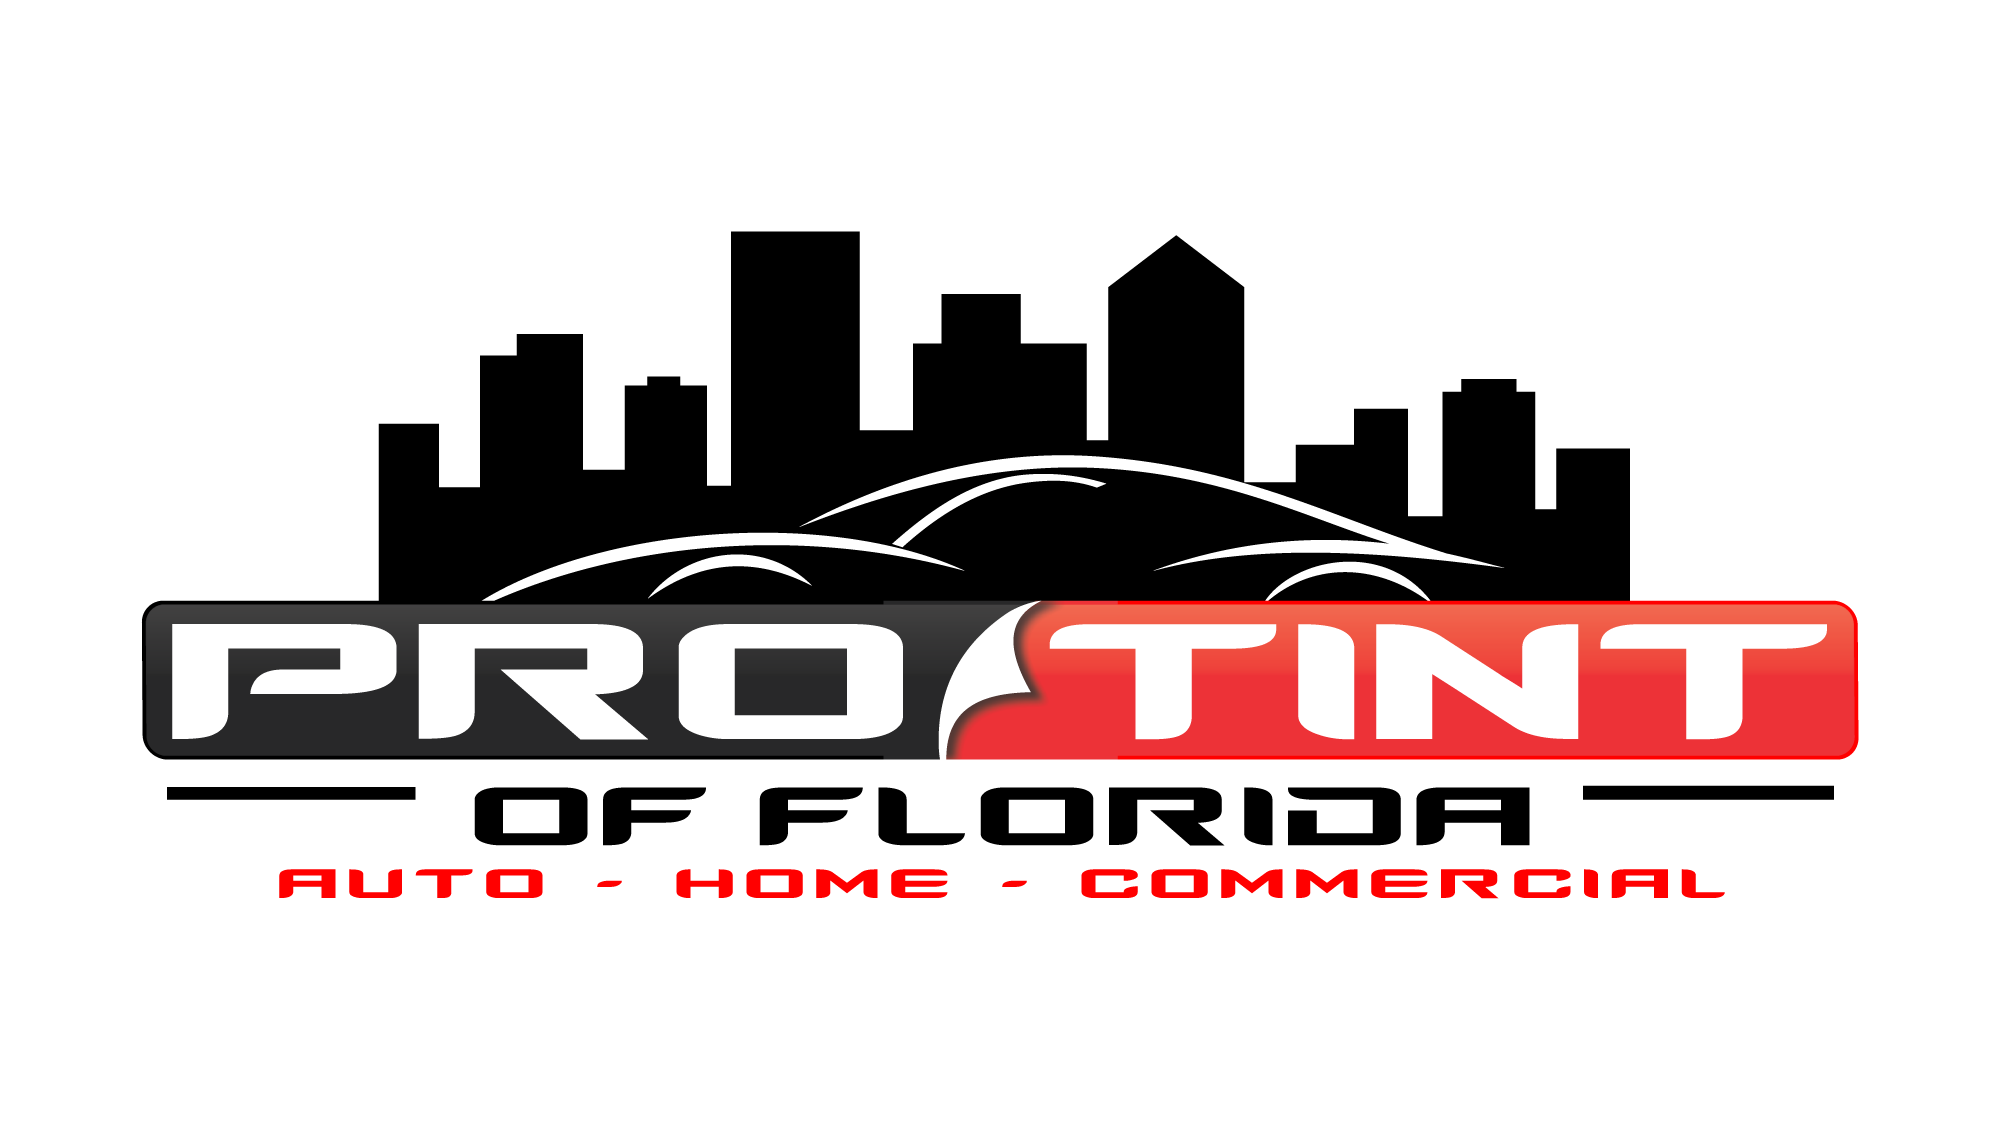 Guide to Florida Window Tint Laws in 2023 - Pro Tint of Orlando